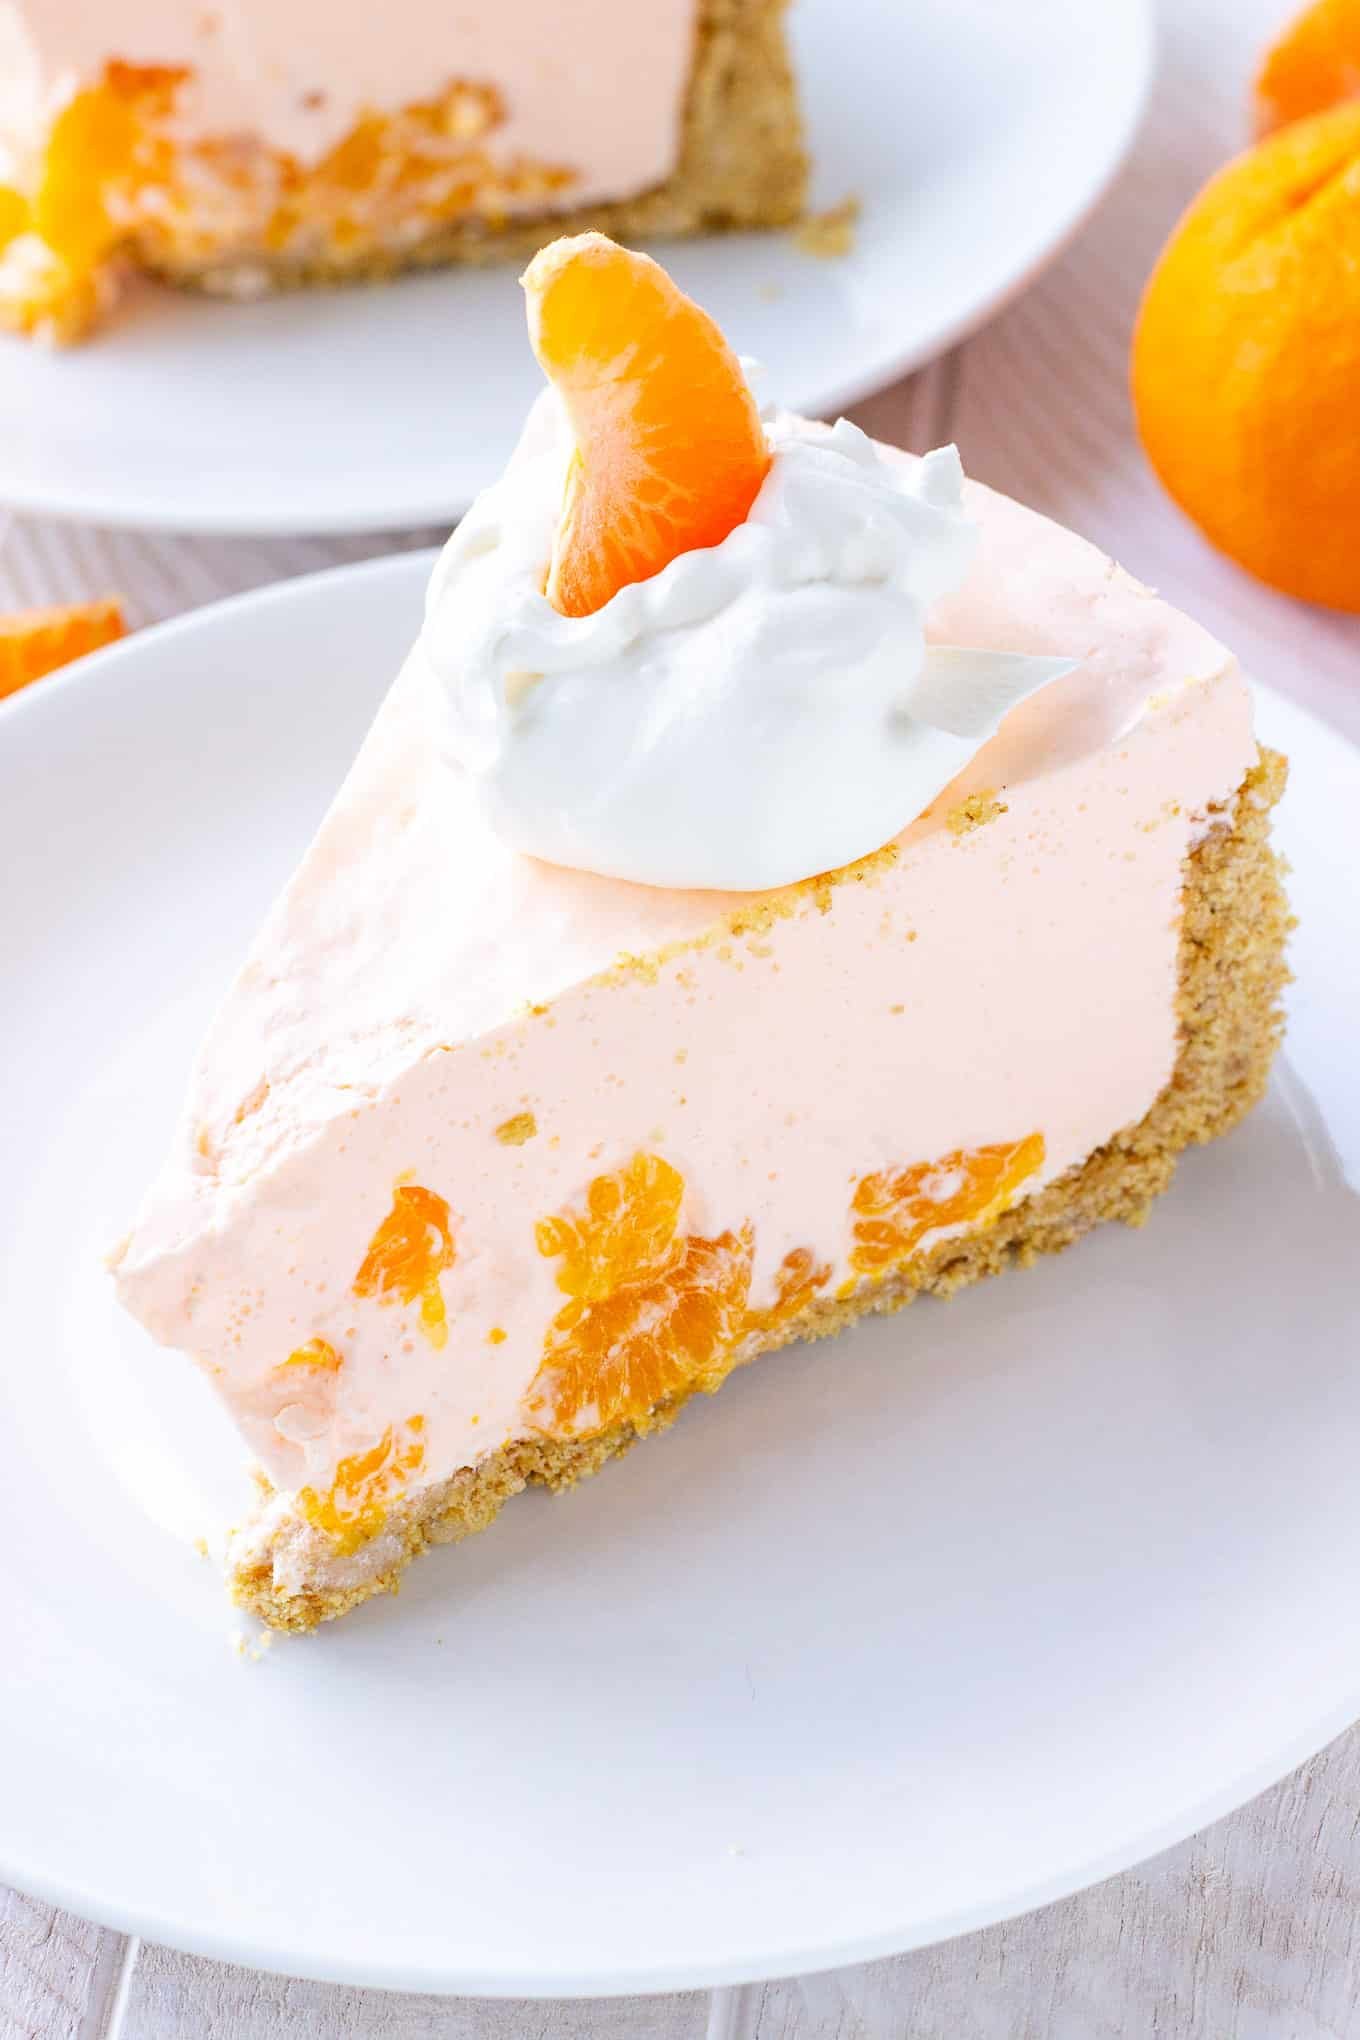 A slice of orange creamsicle pie on a plate topped with whipped cream and a mandarin orange.